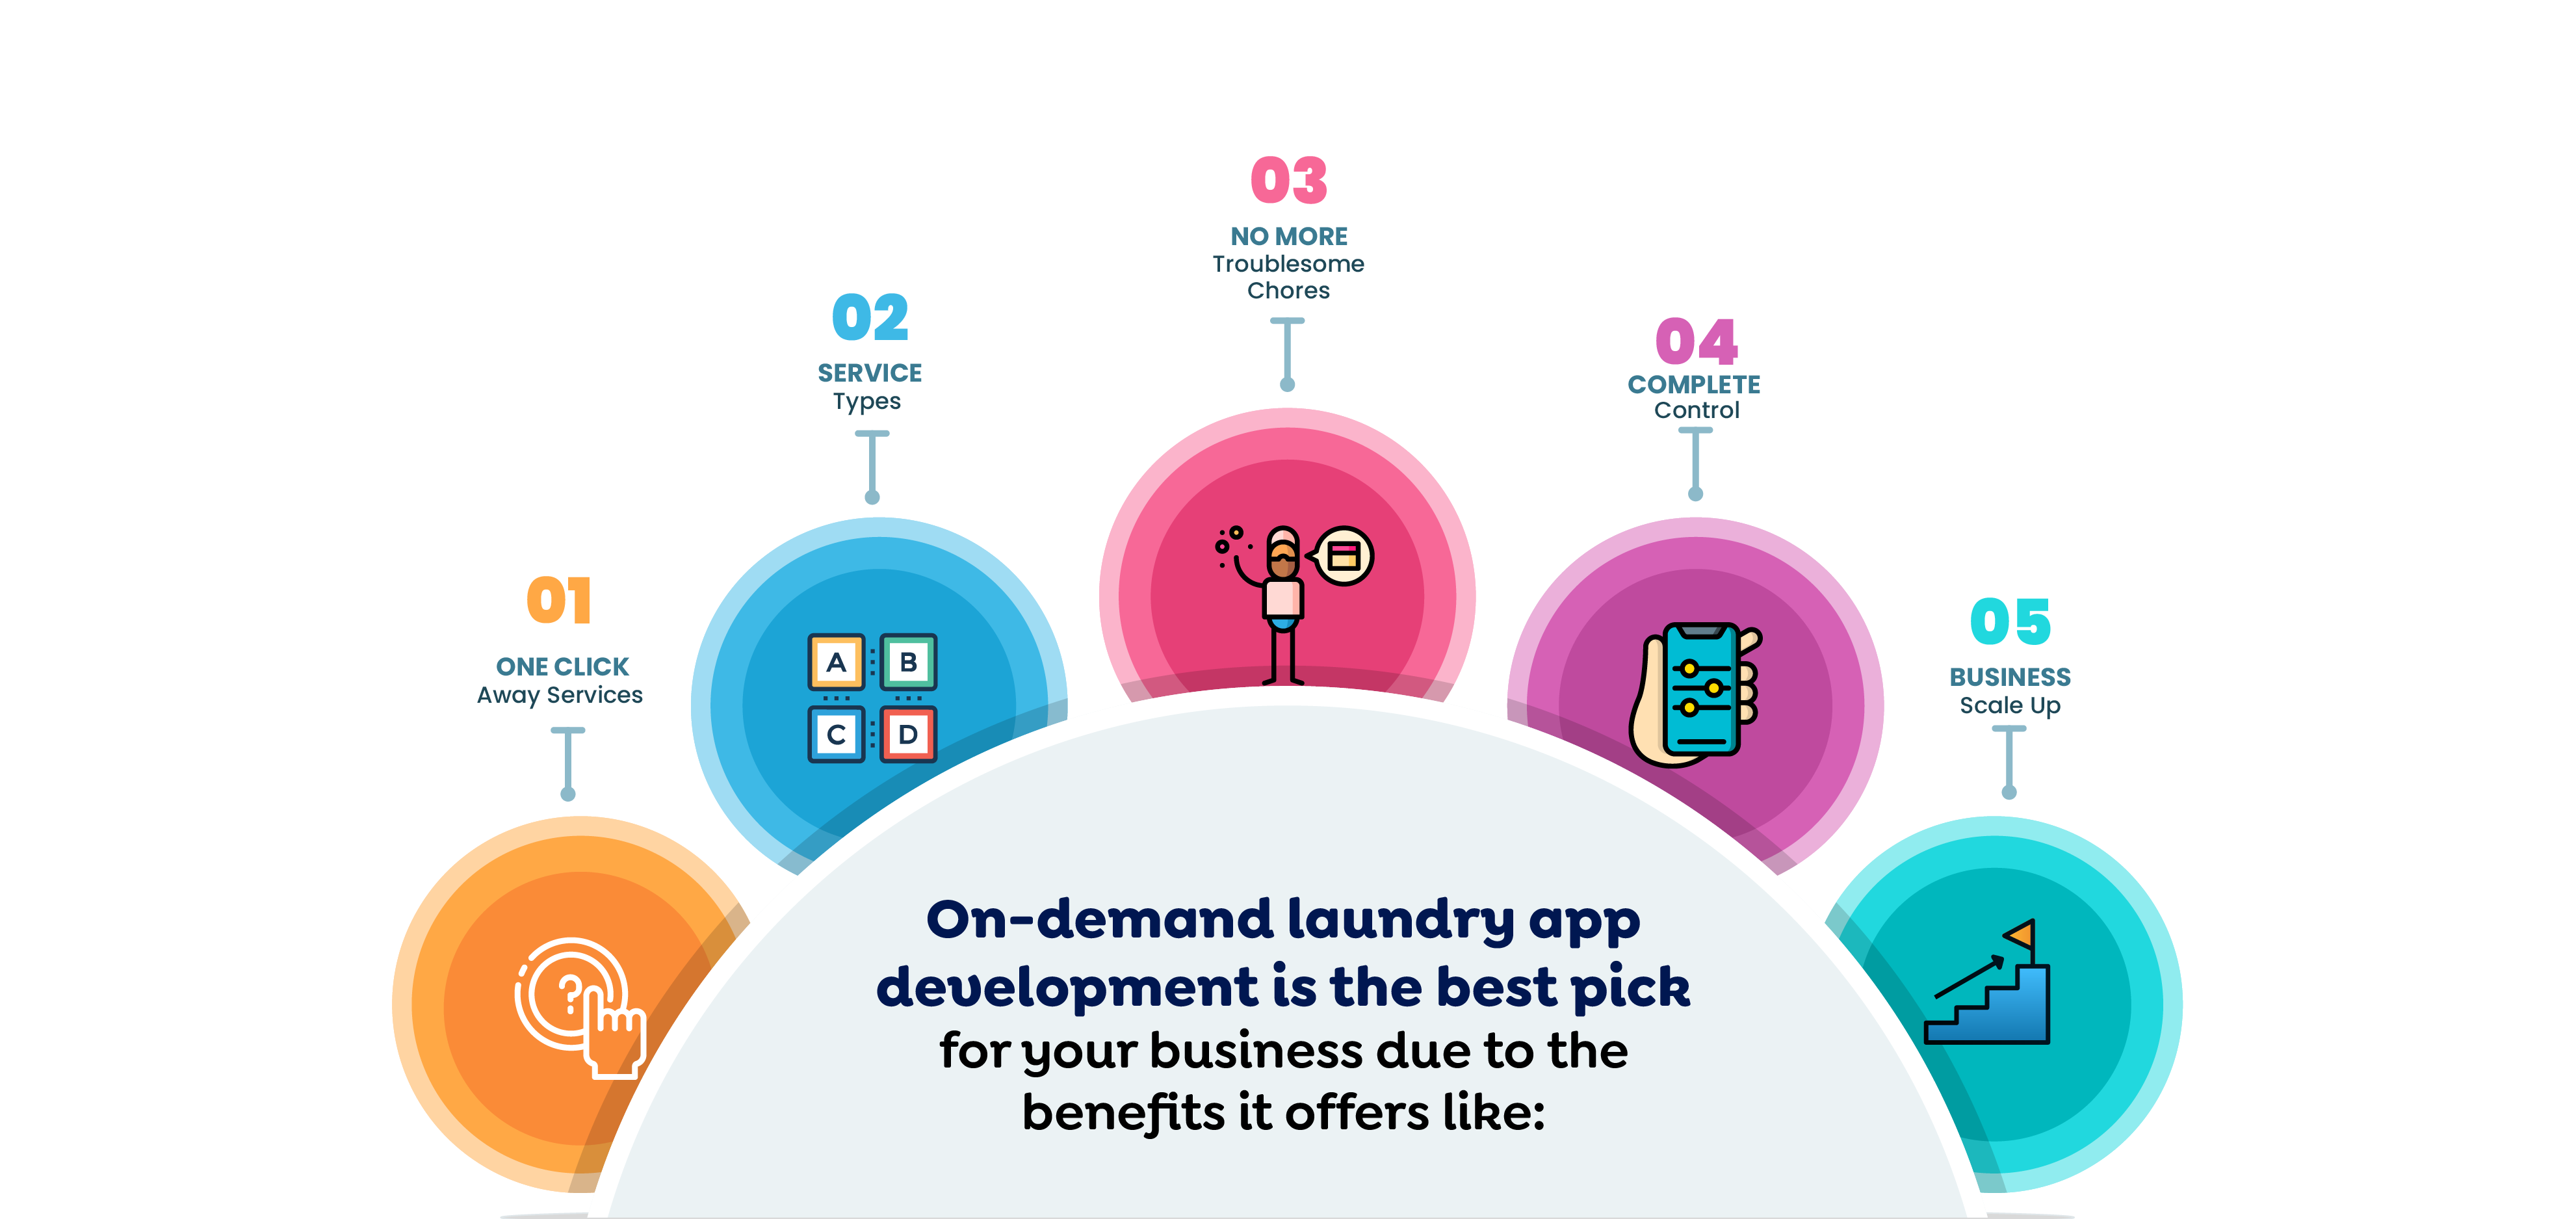 On-demand laundry app development is the best pick for your business due to the benefits it offers like